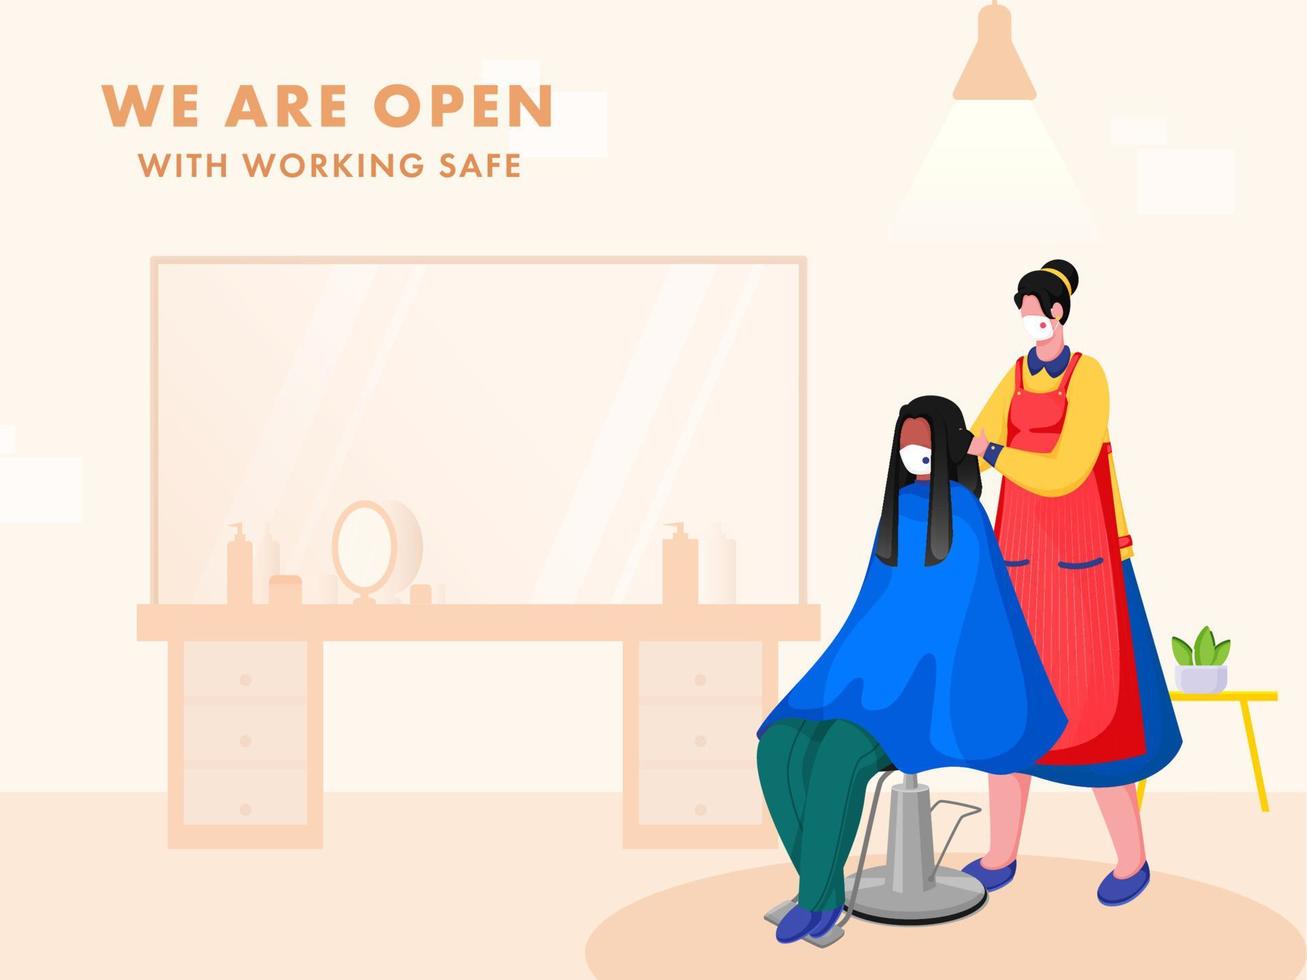 We Are Open With Working Safe Based Poster Design, Female Hairdresser Cutting Hair Of A Client Sitting On Chair In Her Salon. vector